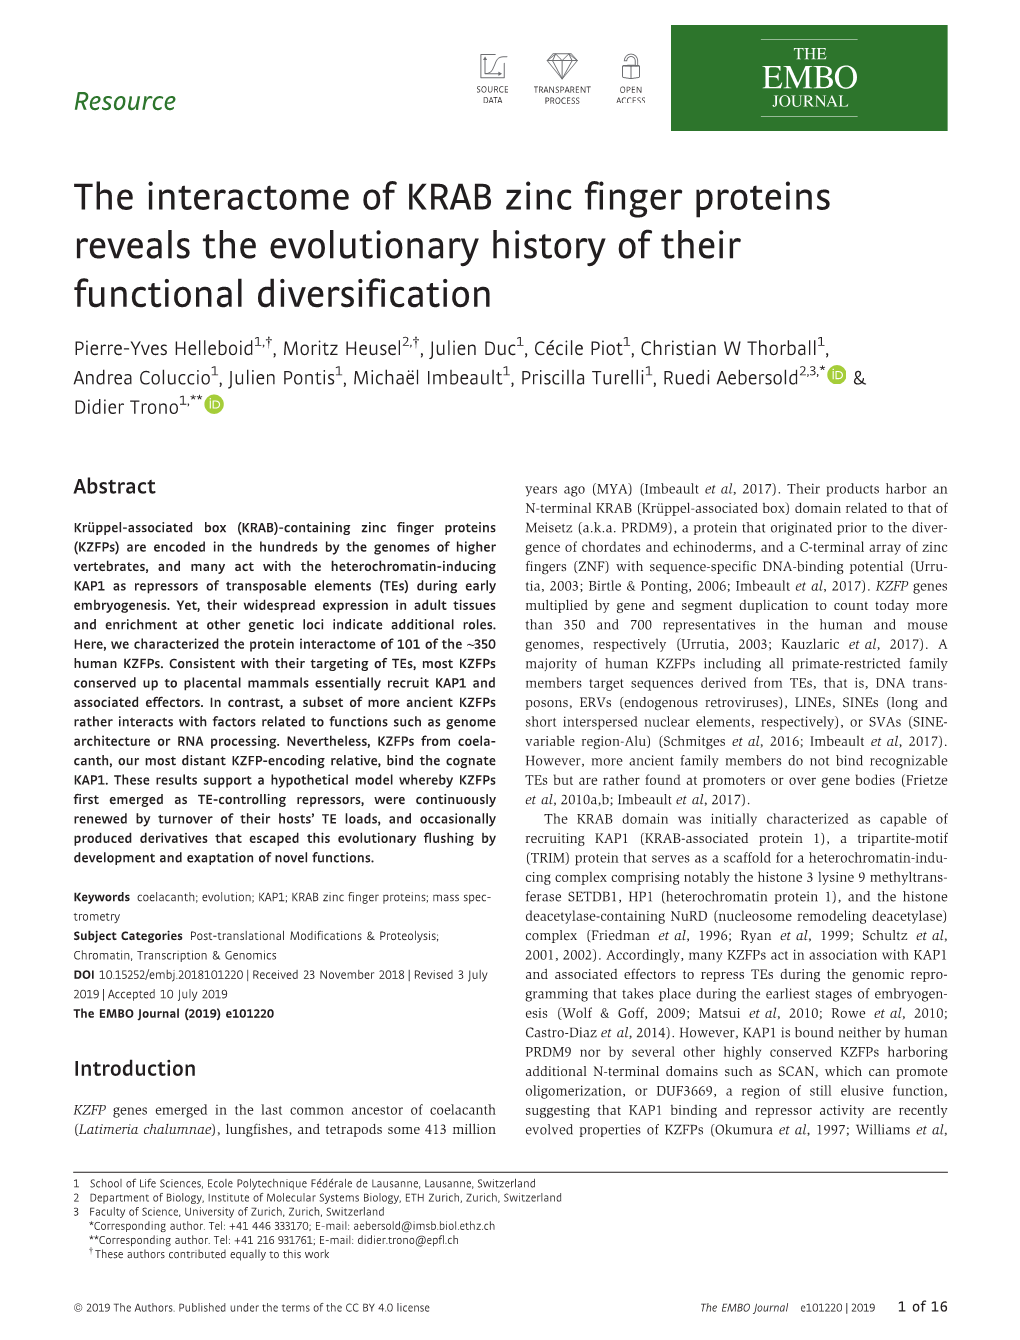 The Interactome of KRAB Zinc Finger Proteins Reveals the Evolutionary History of Their Functional Diversification